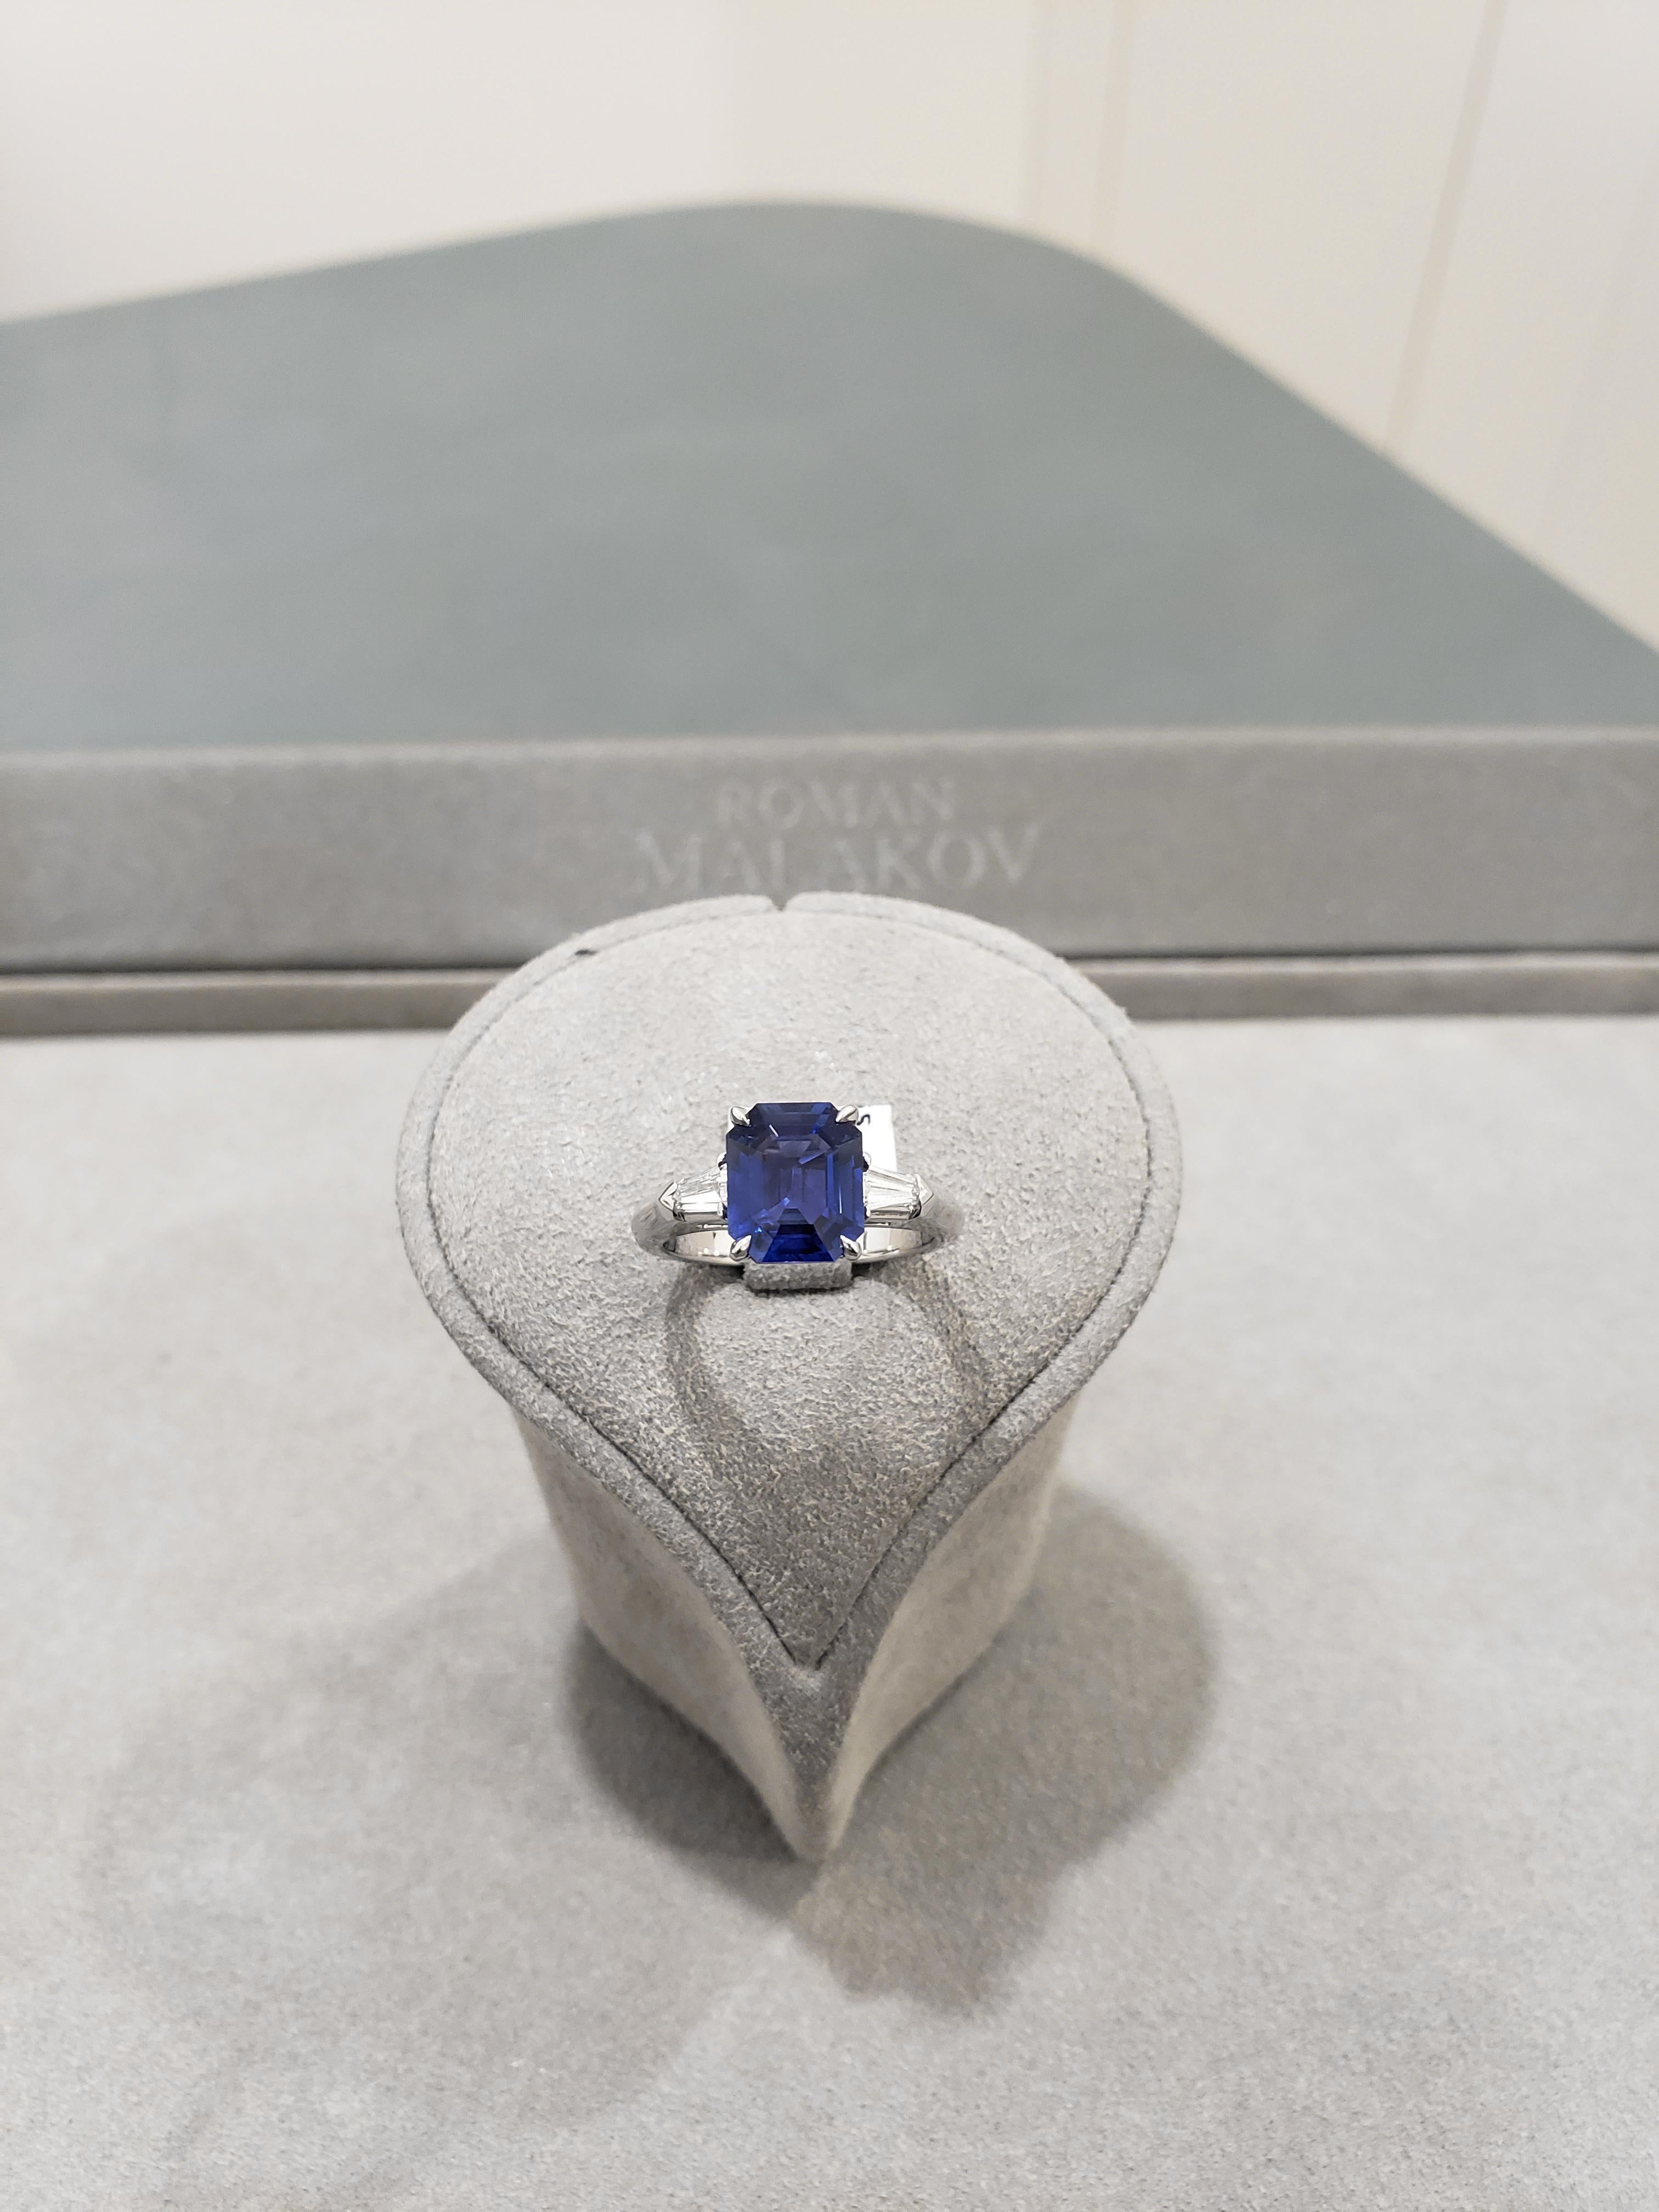 Showcases a 3.09 carat emerald cut blue sapphire, flanked by bullet-shaped diamonds on either side. Diamonds are approximately 0.31 carats, E color, VS clarity. Set in a platinum band. Sapphire certified as NO HEAT.

Style available in different